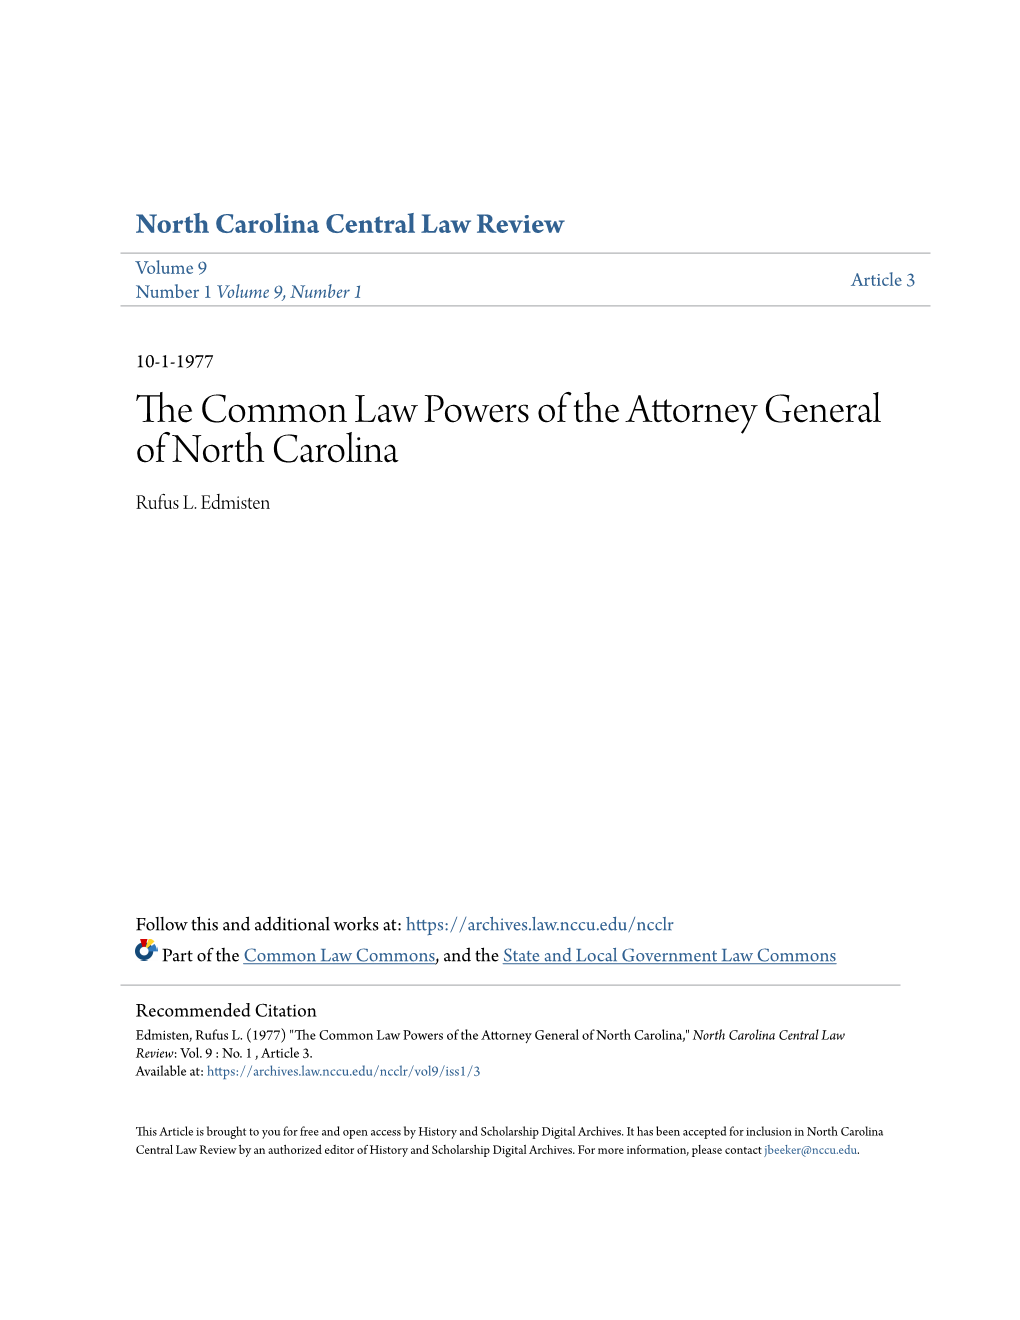 The Common Law Powers of the Attorney General of North Carolina